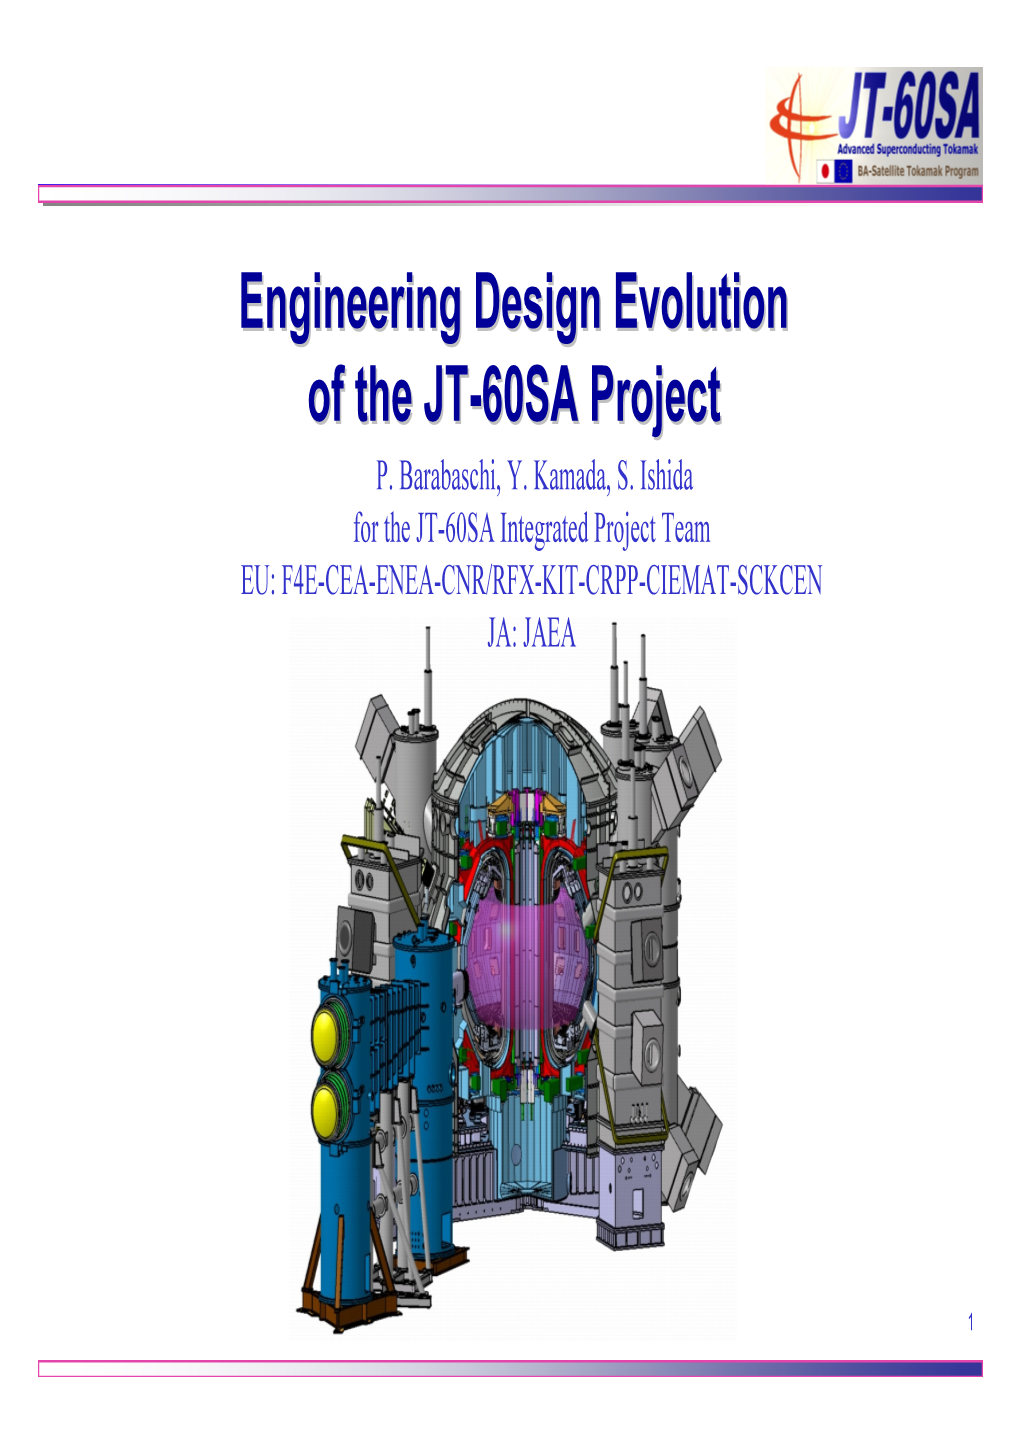 Engineering Design Evolution of the JT-60SA Project